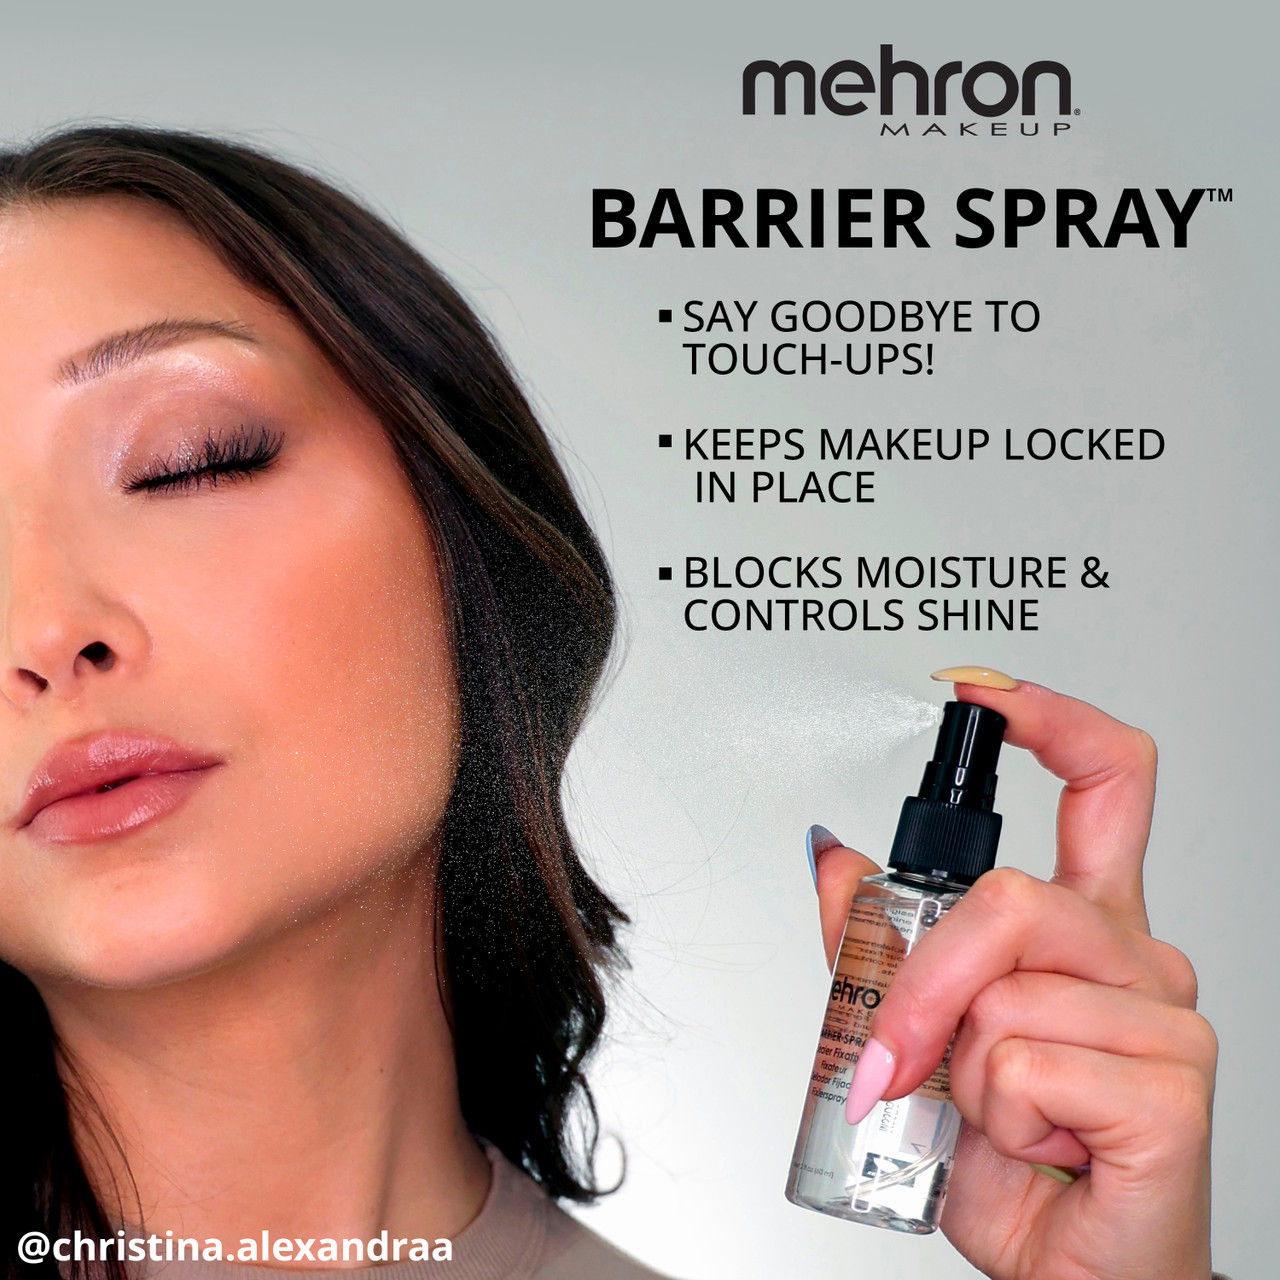 How to Use Mehron Barrier Spray™️ to Lock in Makeup 